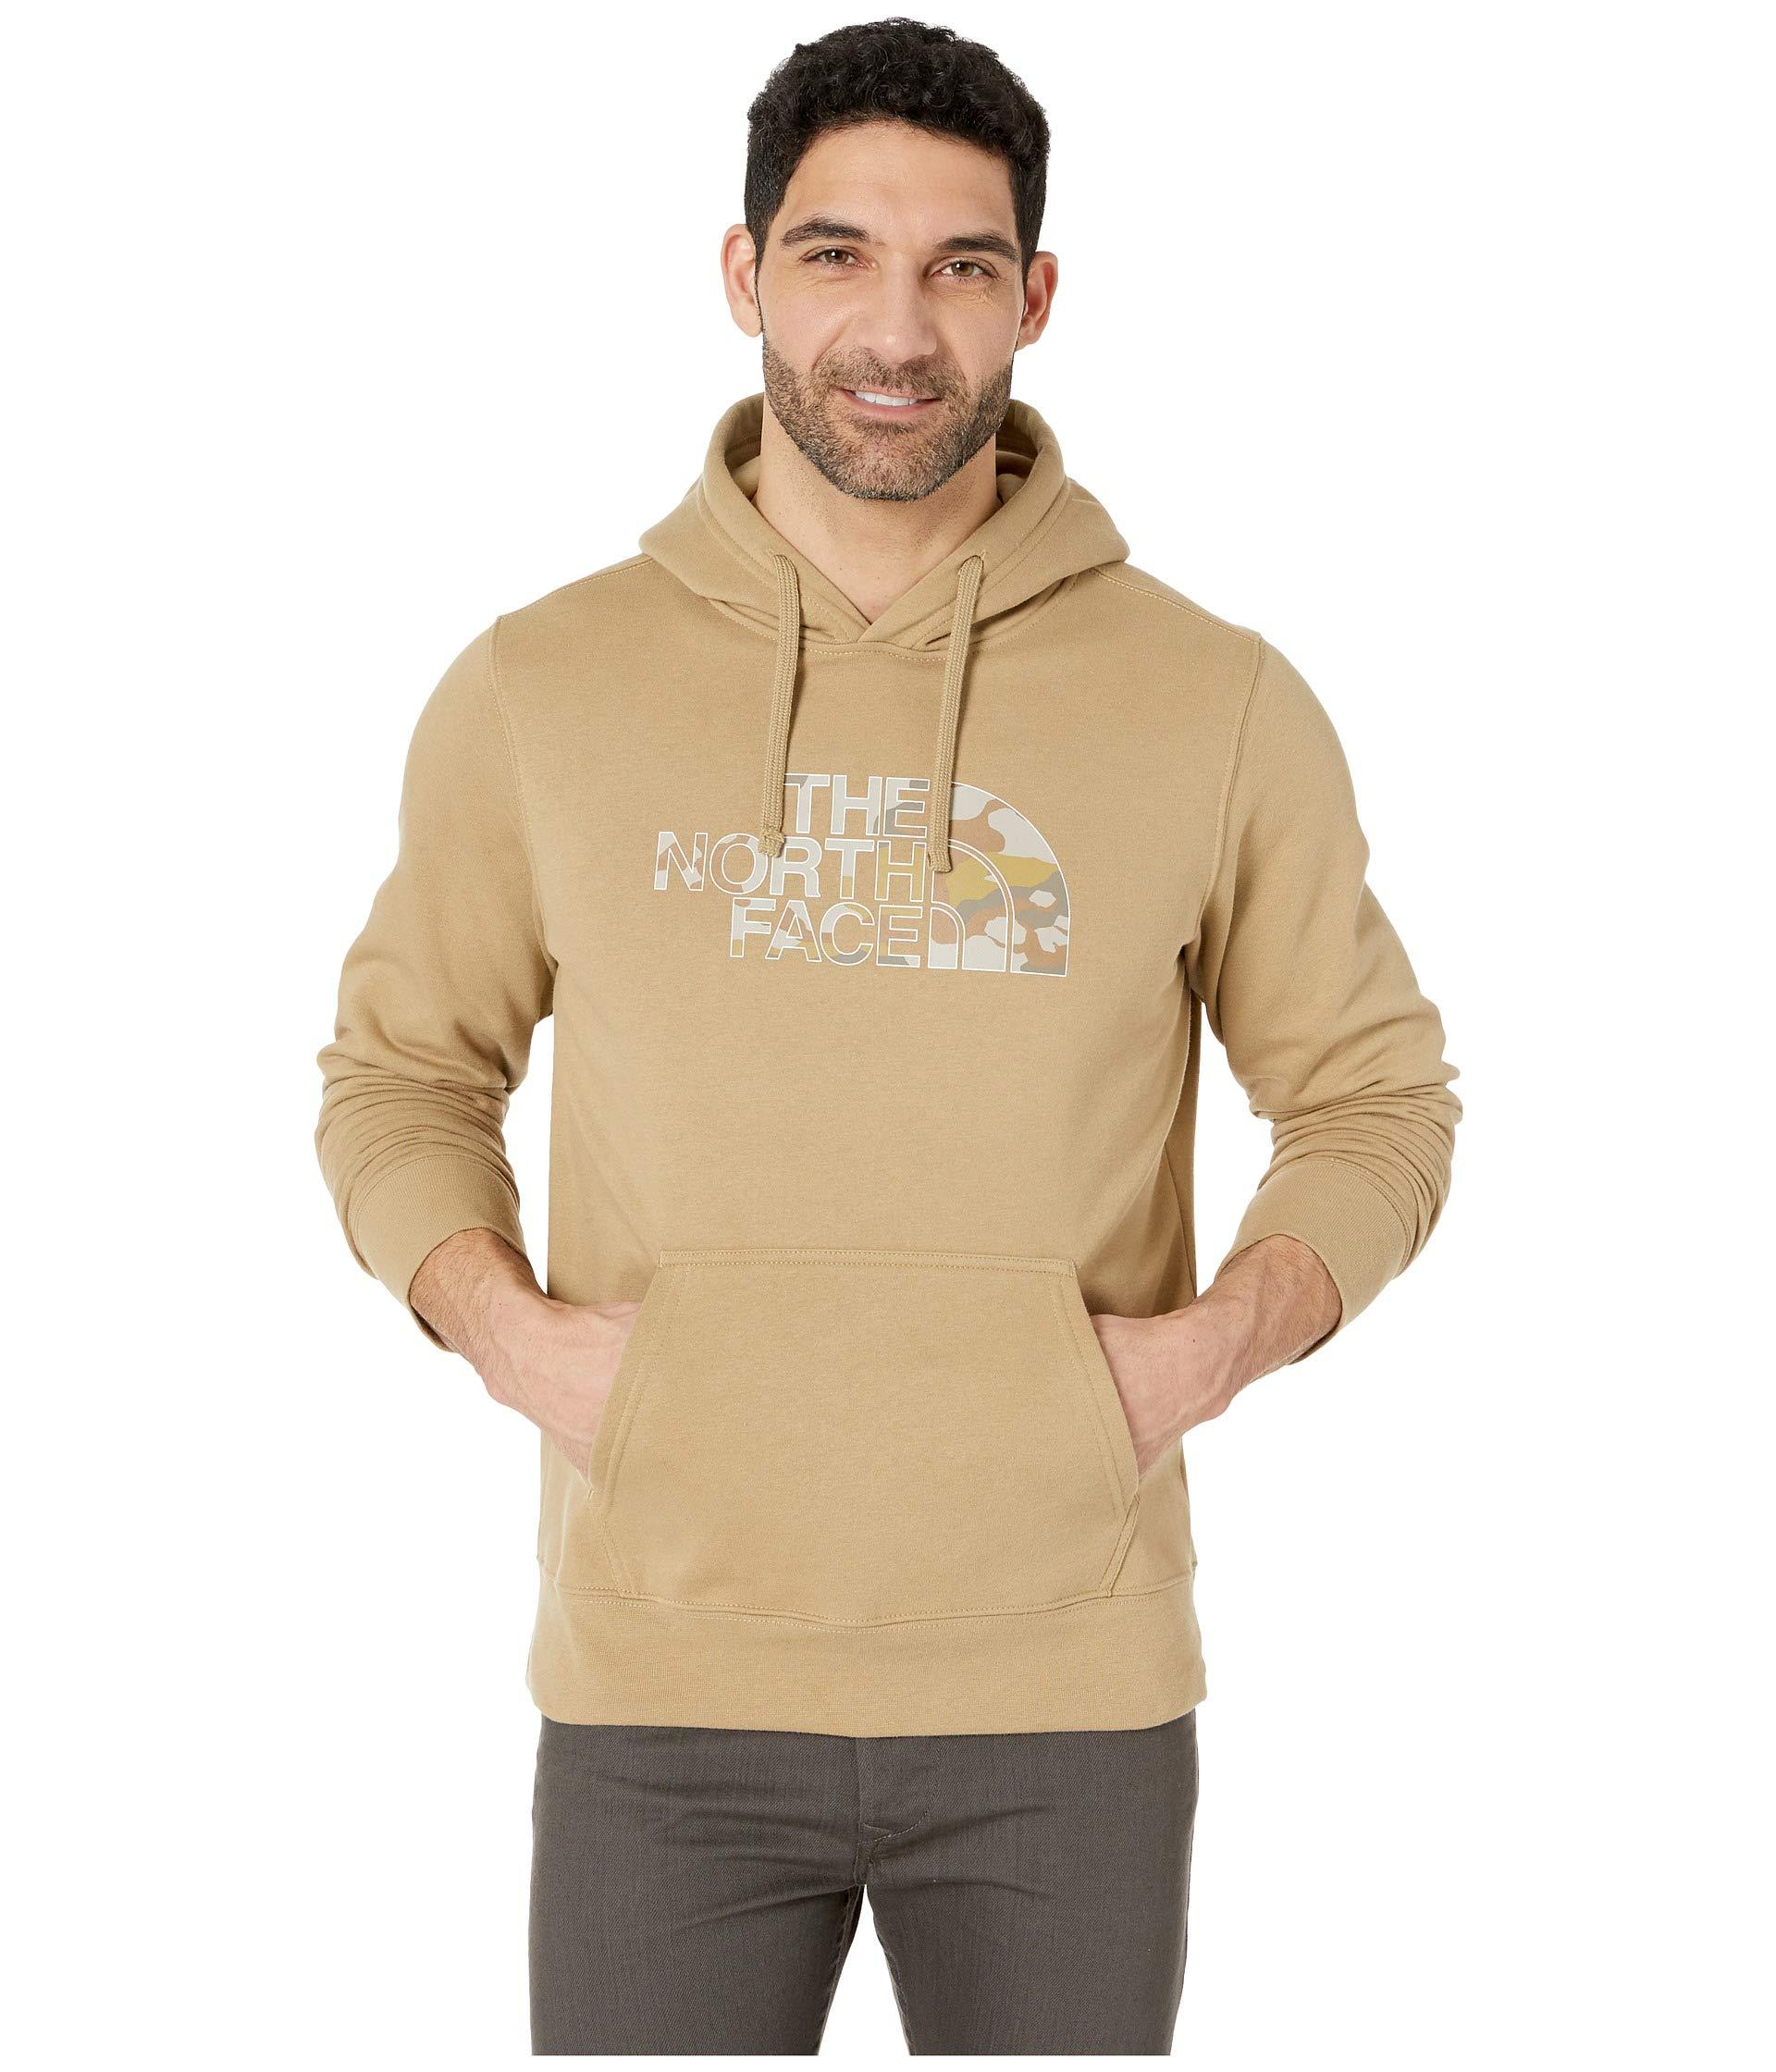 The North Face Tan Hoodie Factory Sale, SAVE 57%.